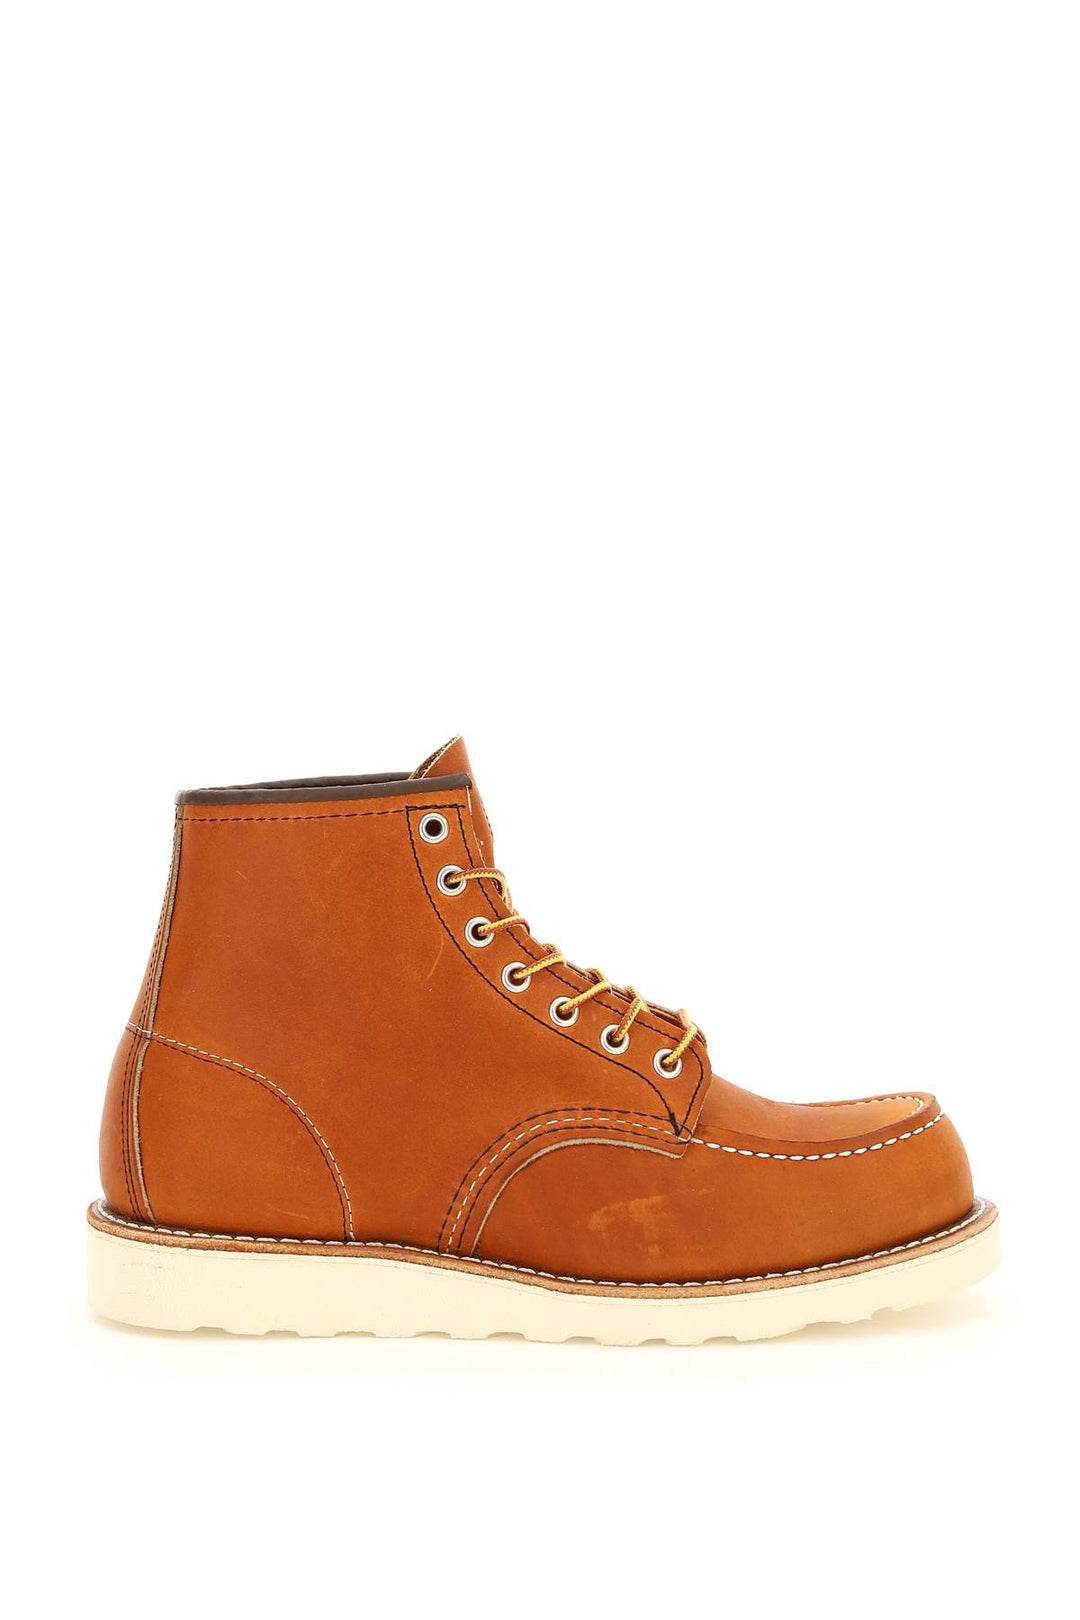 Red Wing Shoes Classic Moc Ankle Boots   Marrone